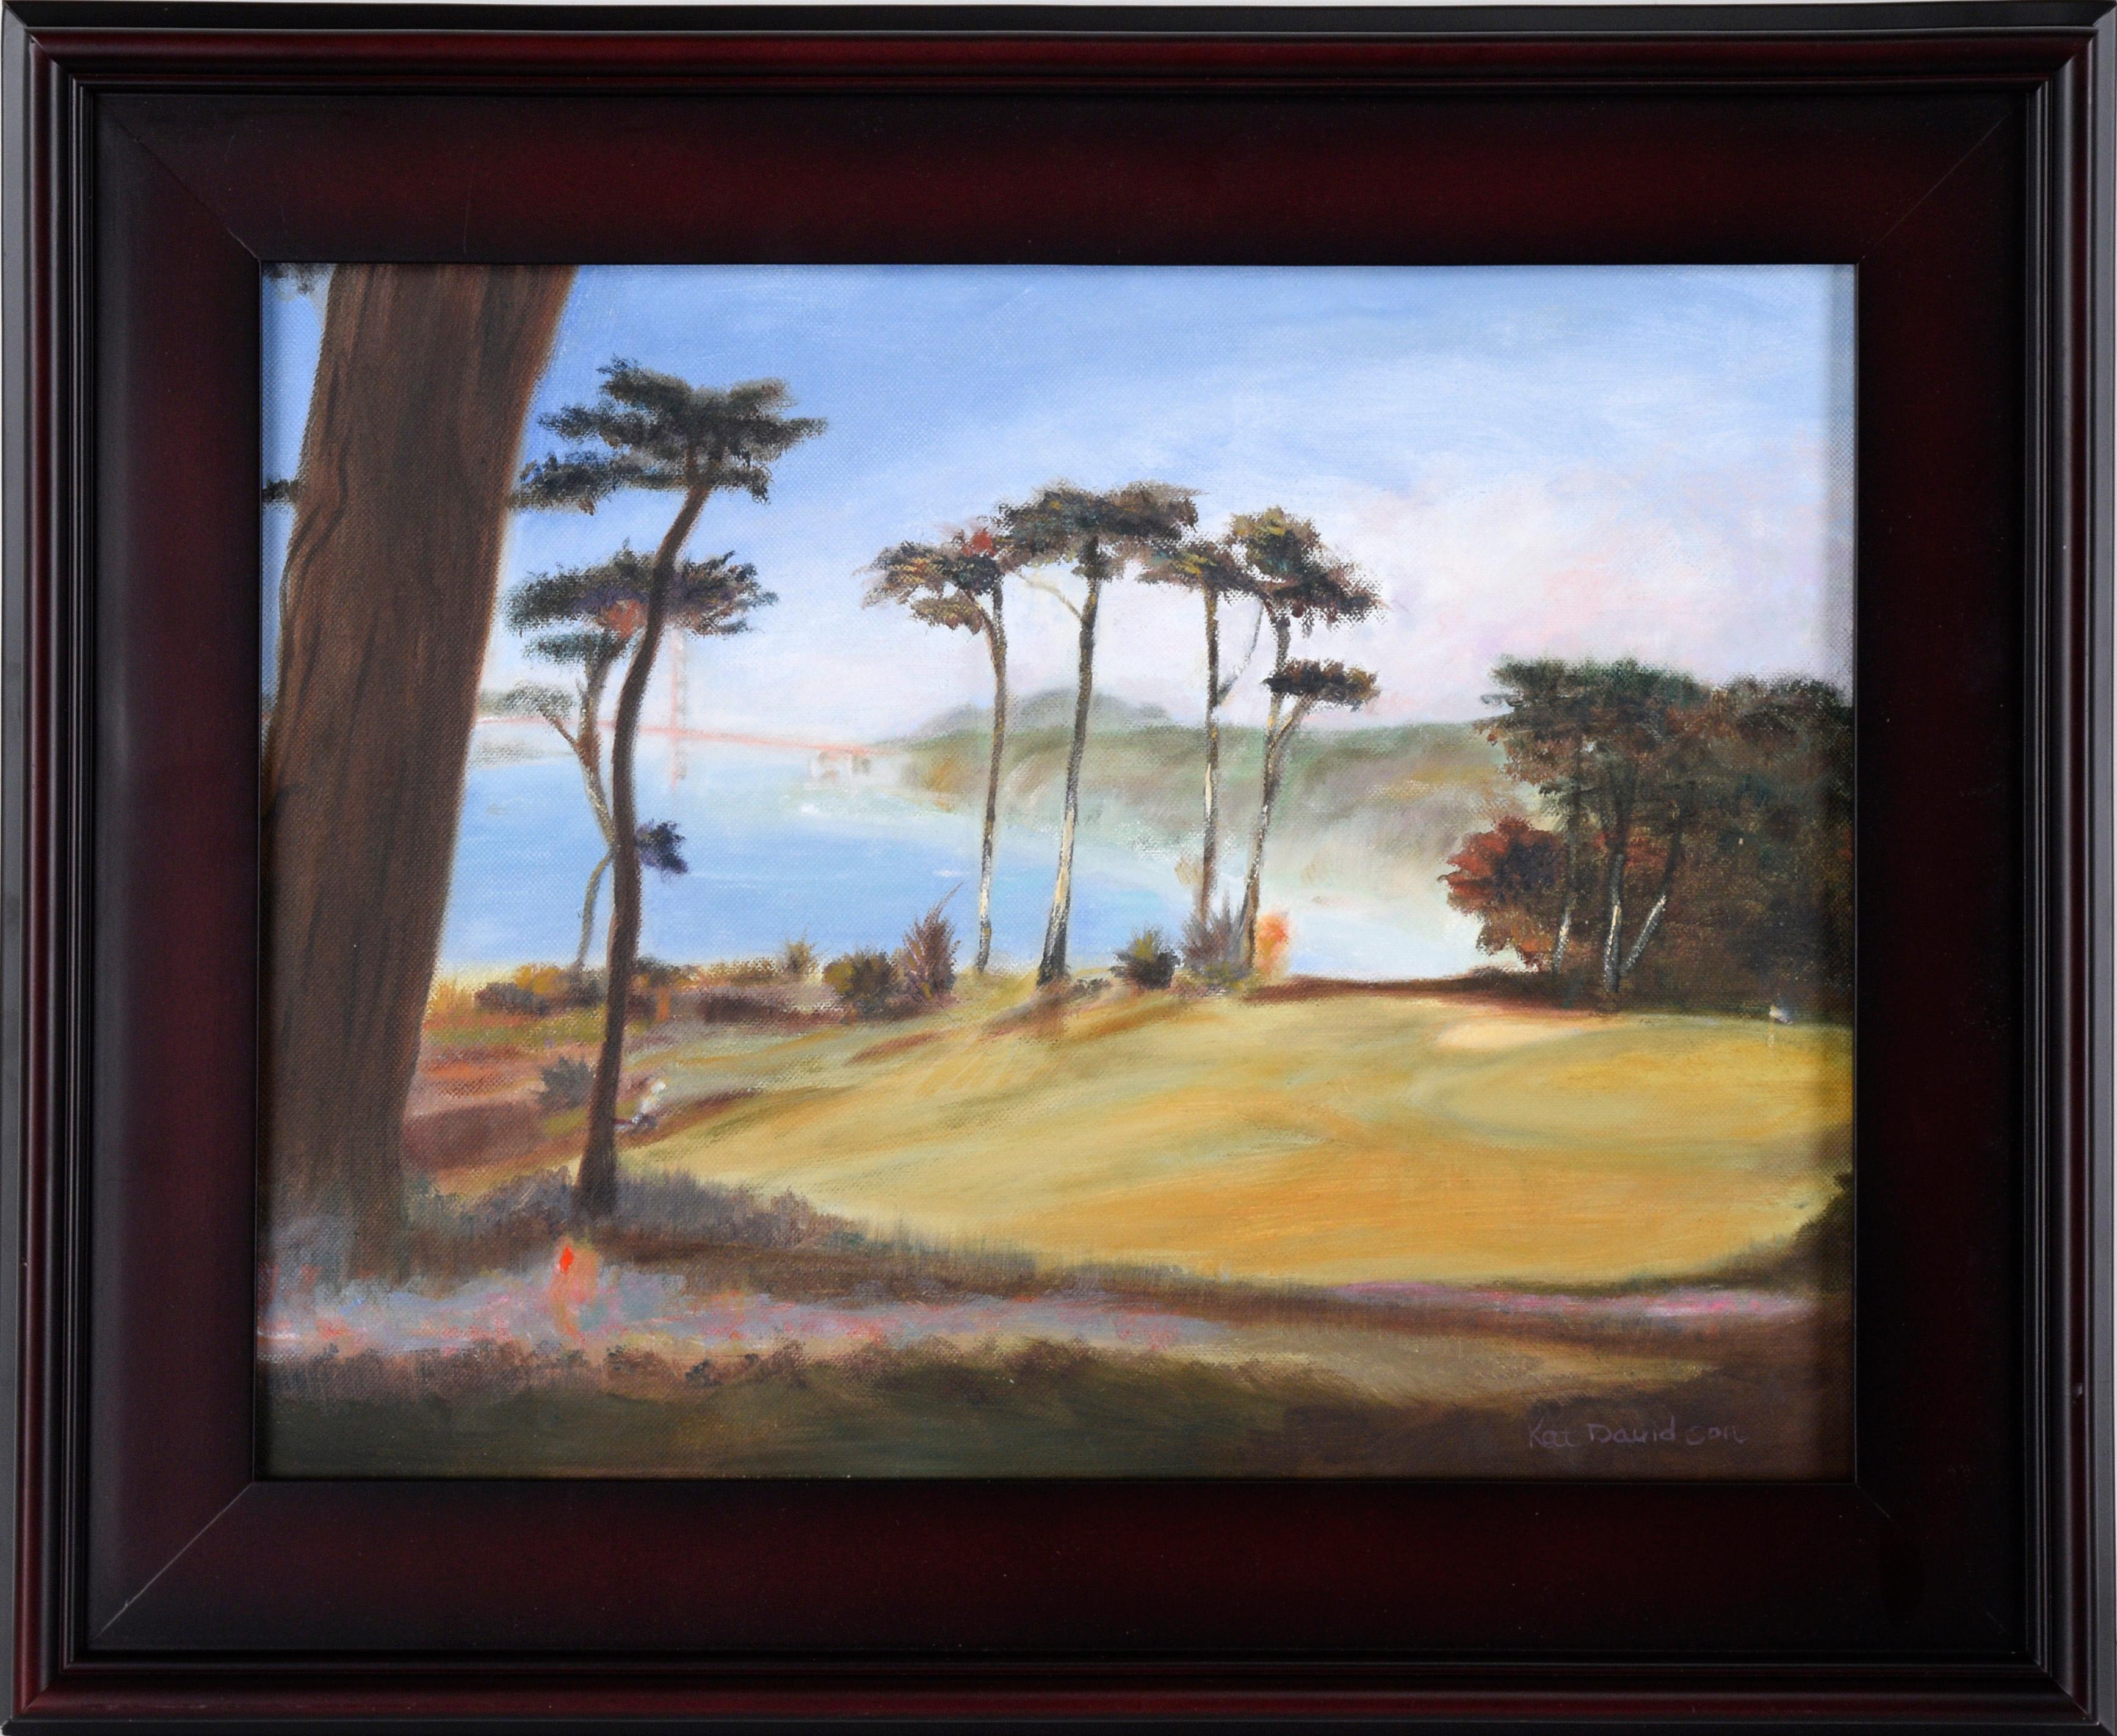 Kat Davidson Landscape Painting - Golf Course by the Bay - Contemporary Plein Aire Landscape in Oil on Canvas